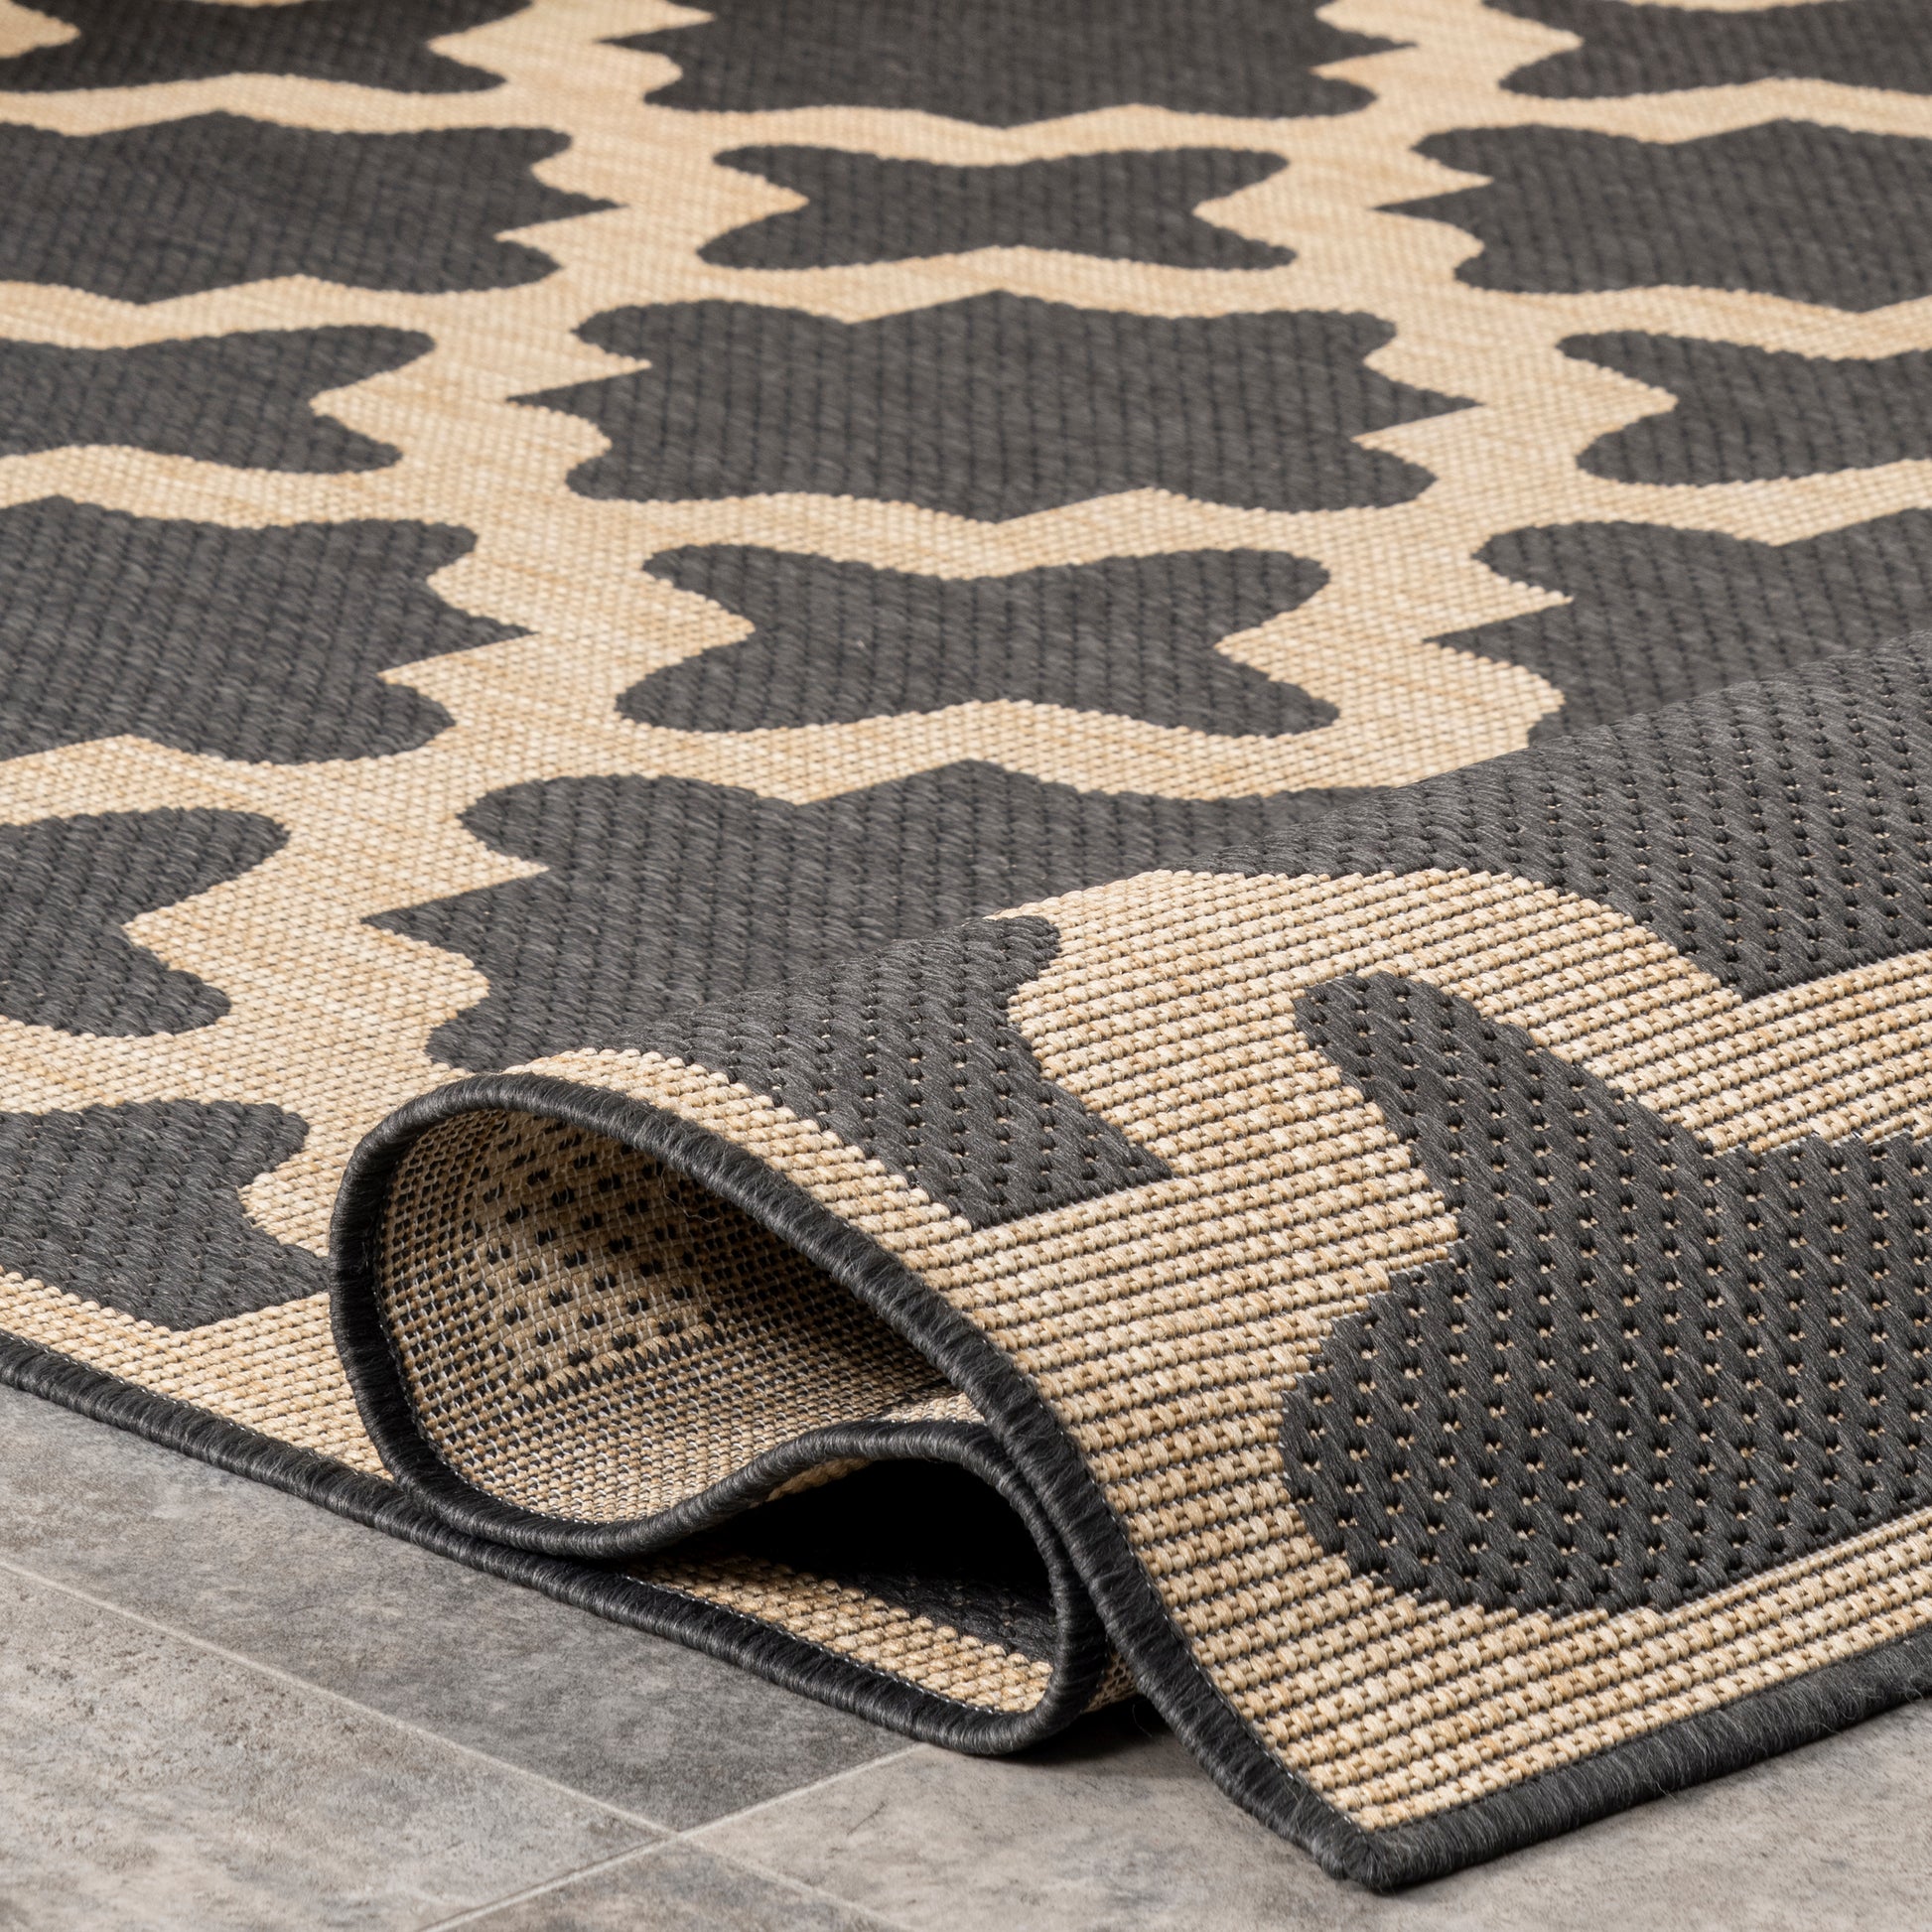 Nuloom Shiloh Star Nsh1784C Charcoal Area Rug